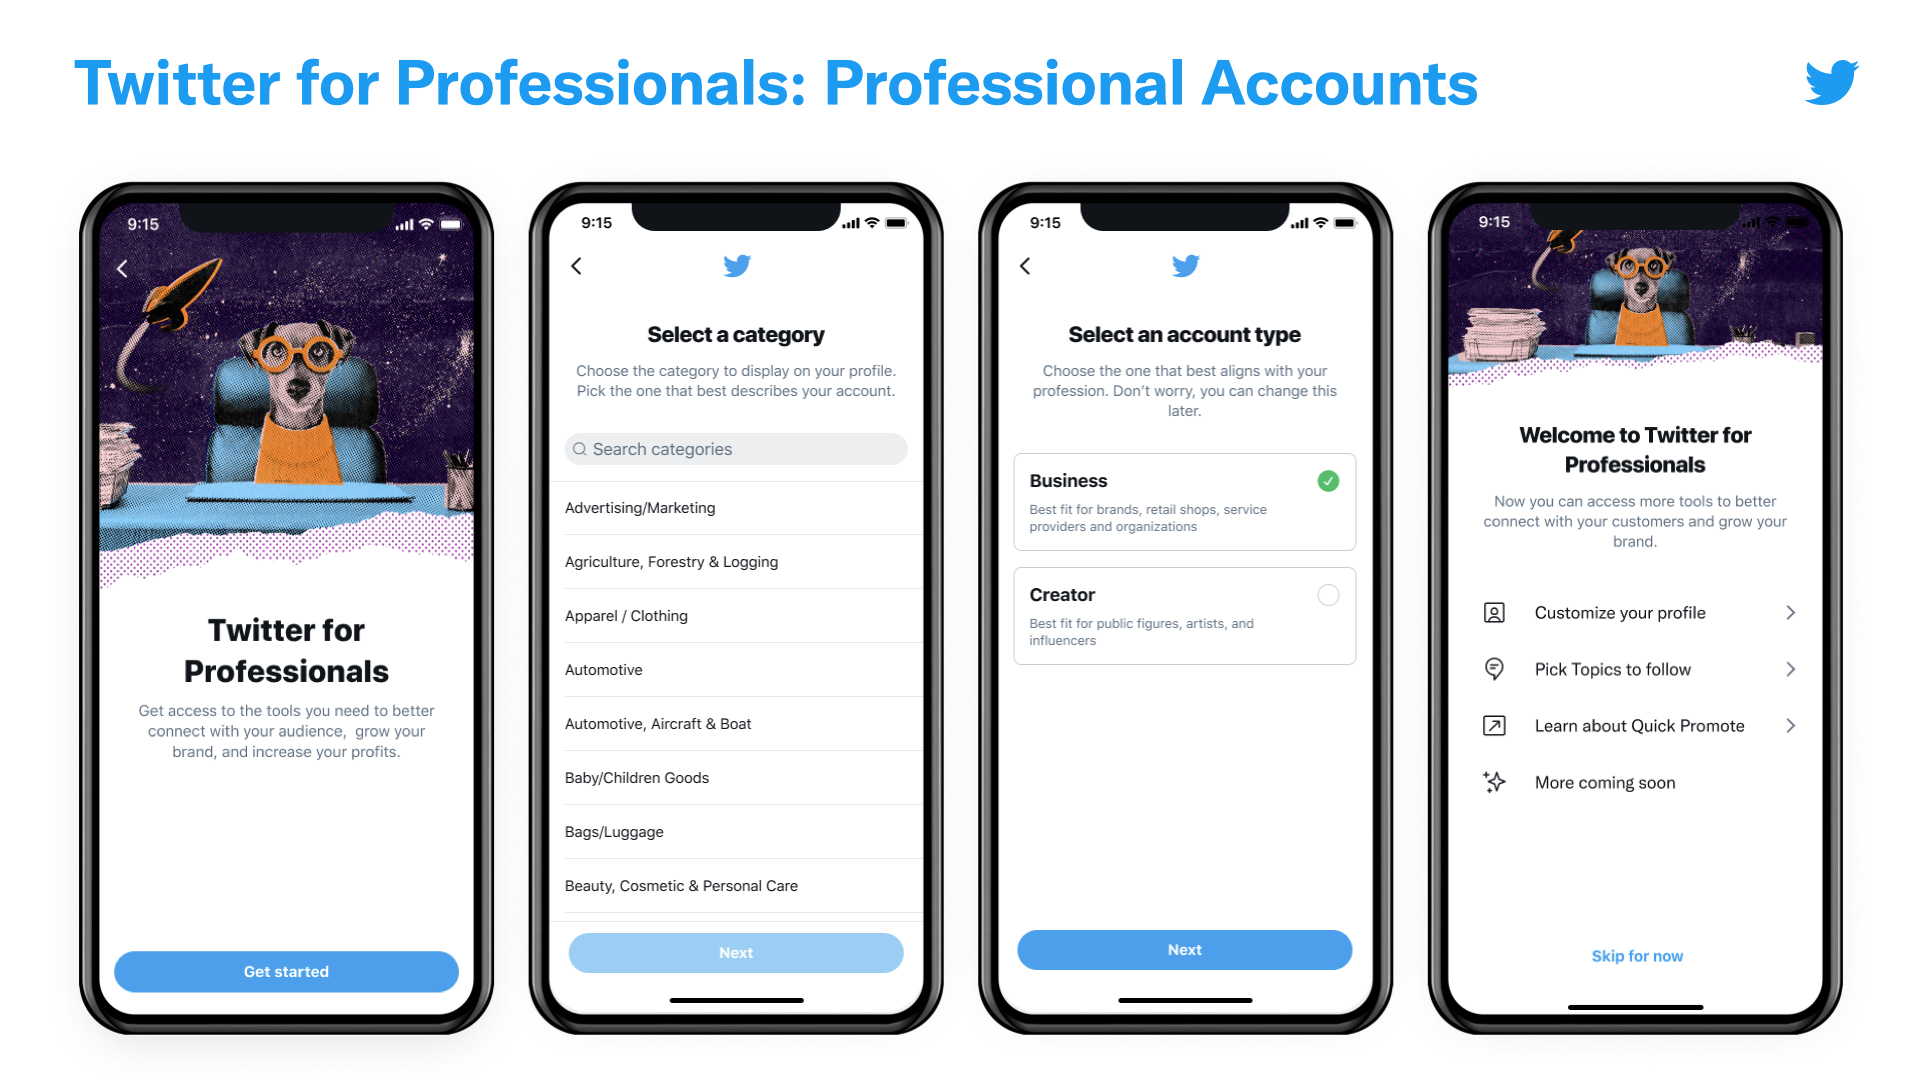 Introducing Twitter for Professionals